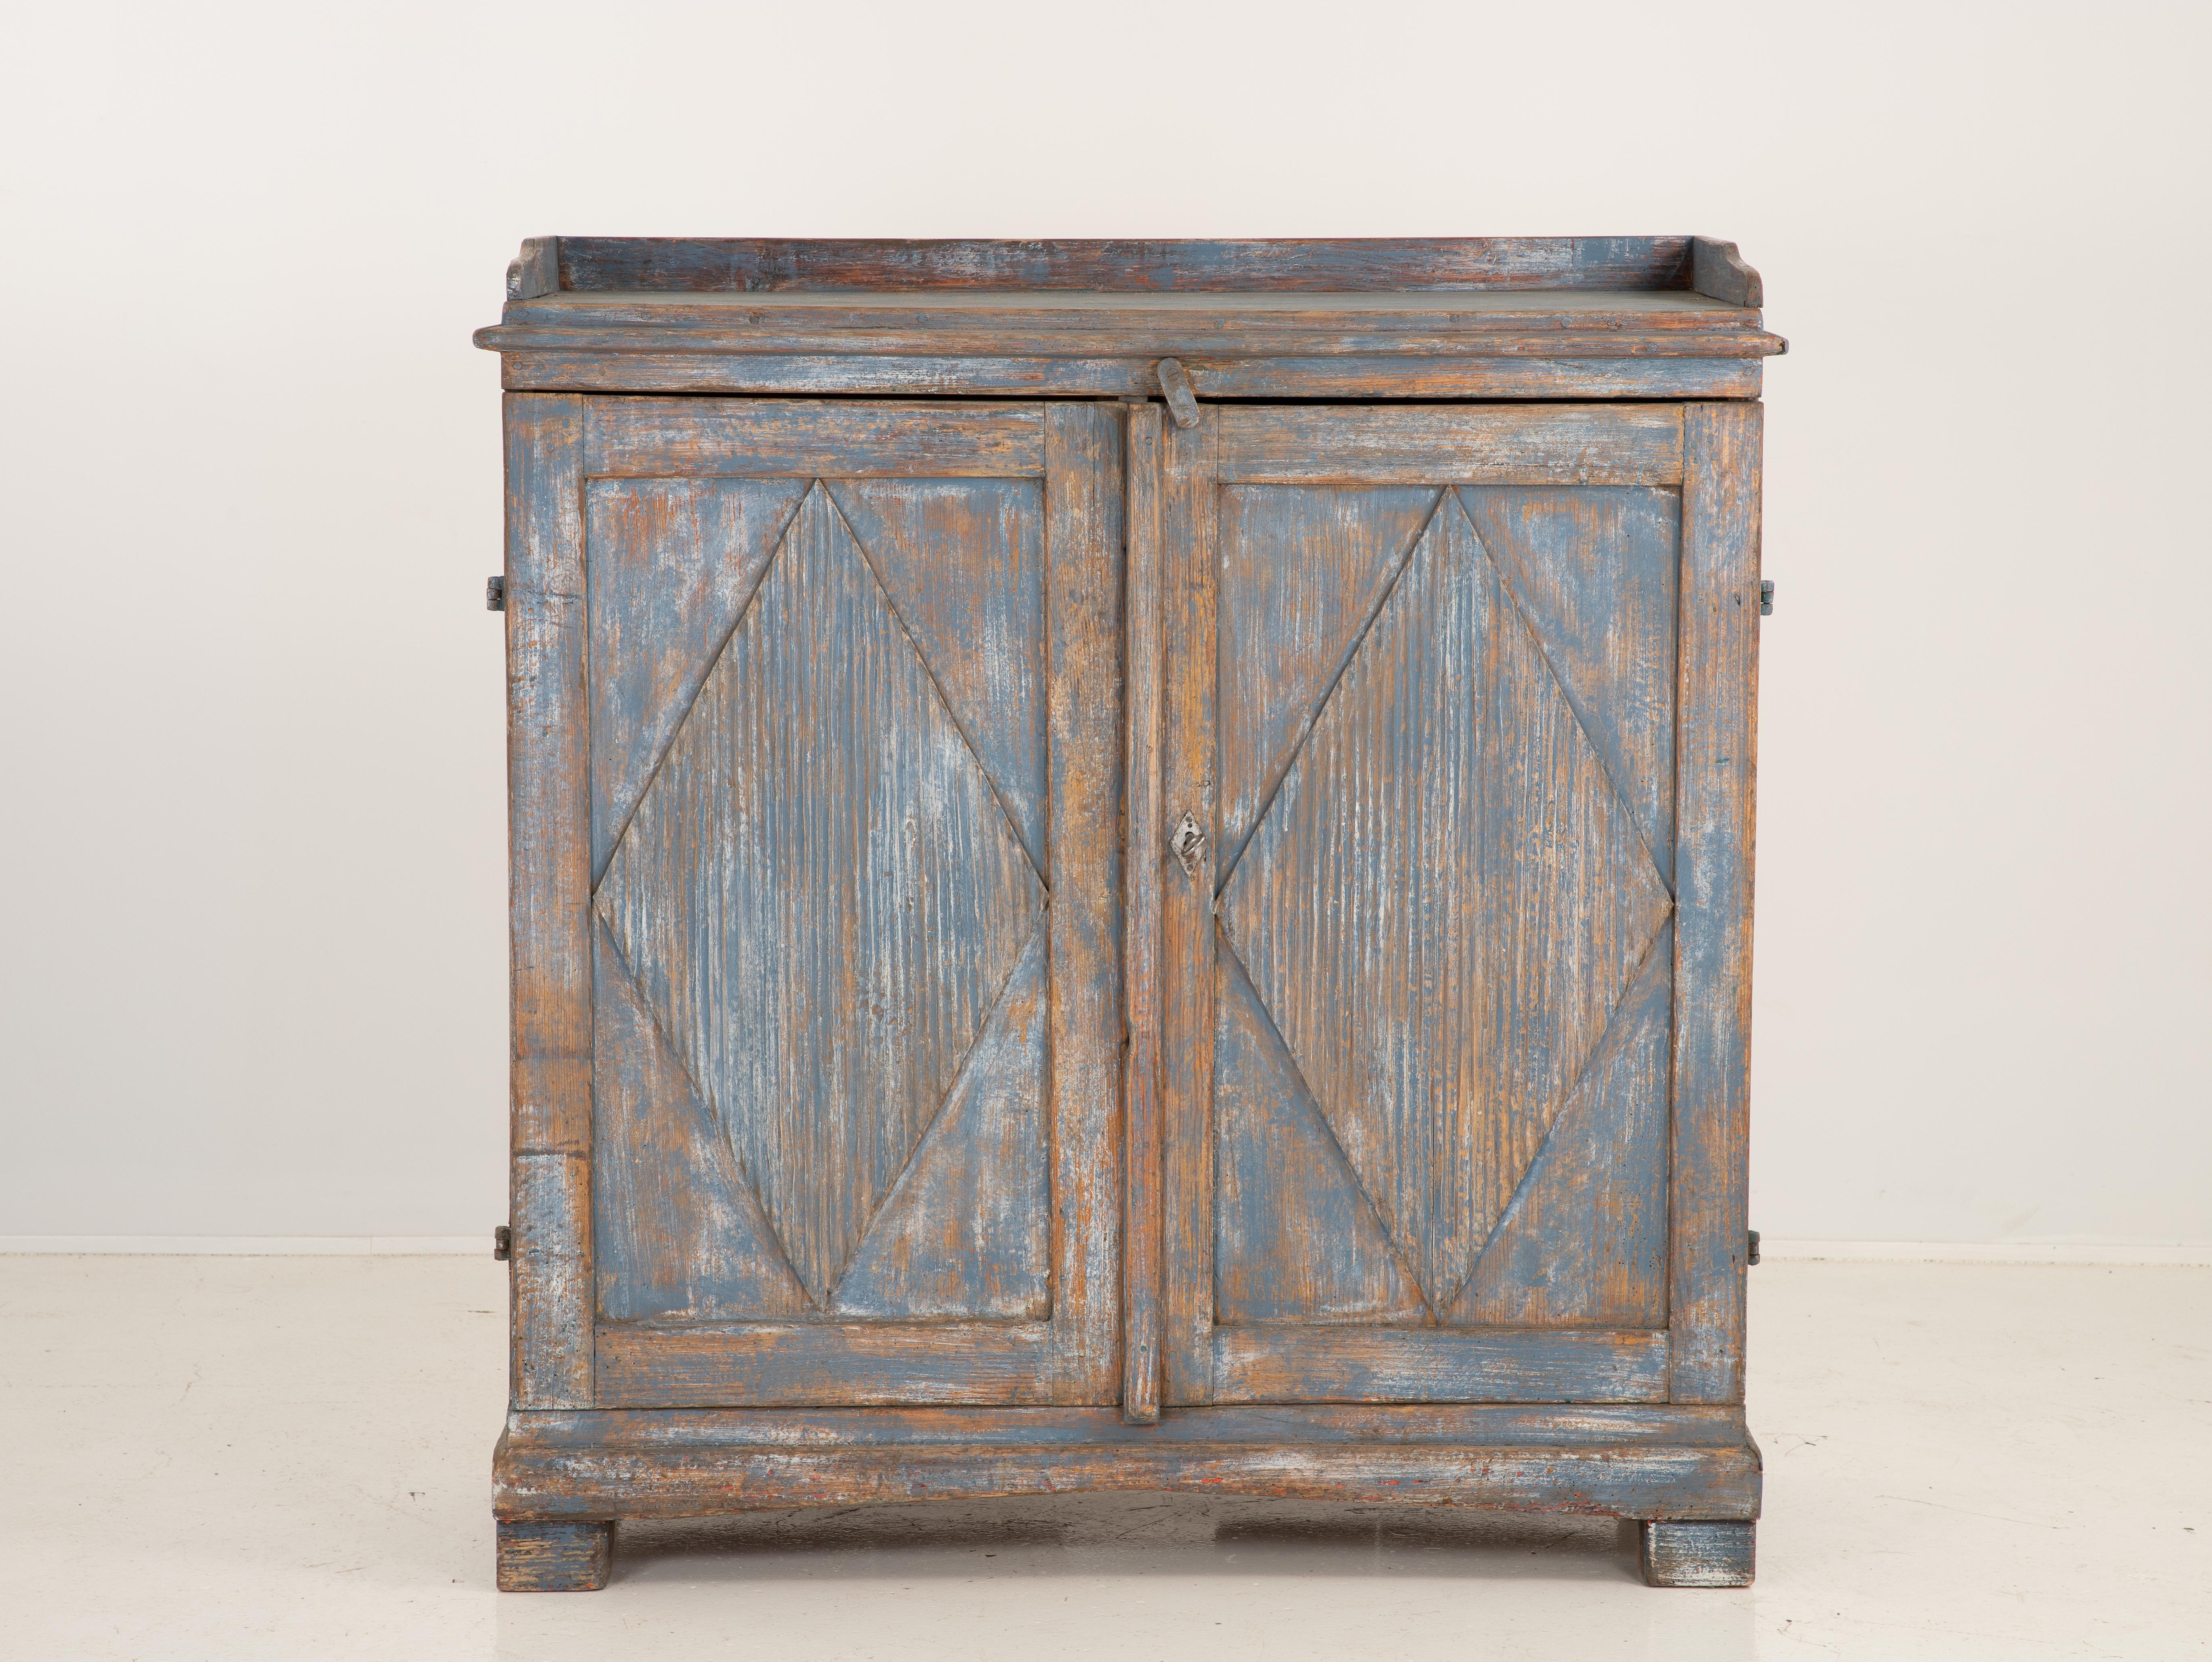 A Gustavian style buffet finished in a rich blue color. Two doors with one shelf inside. Each door has a large reeded lozenge panel, an iconic design typical of the style. The top of the buffet has a gallery edge. Working lock and key.